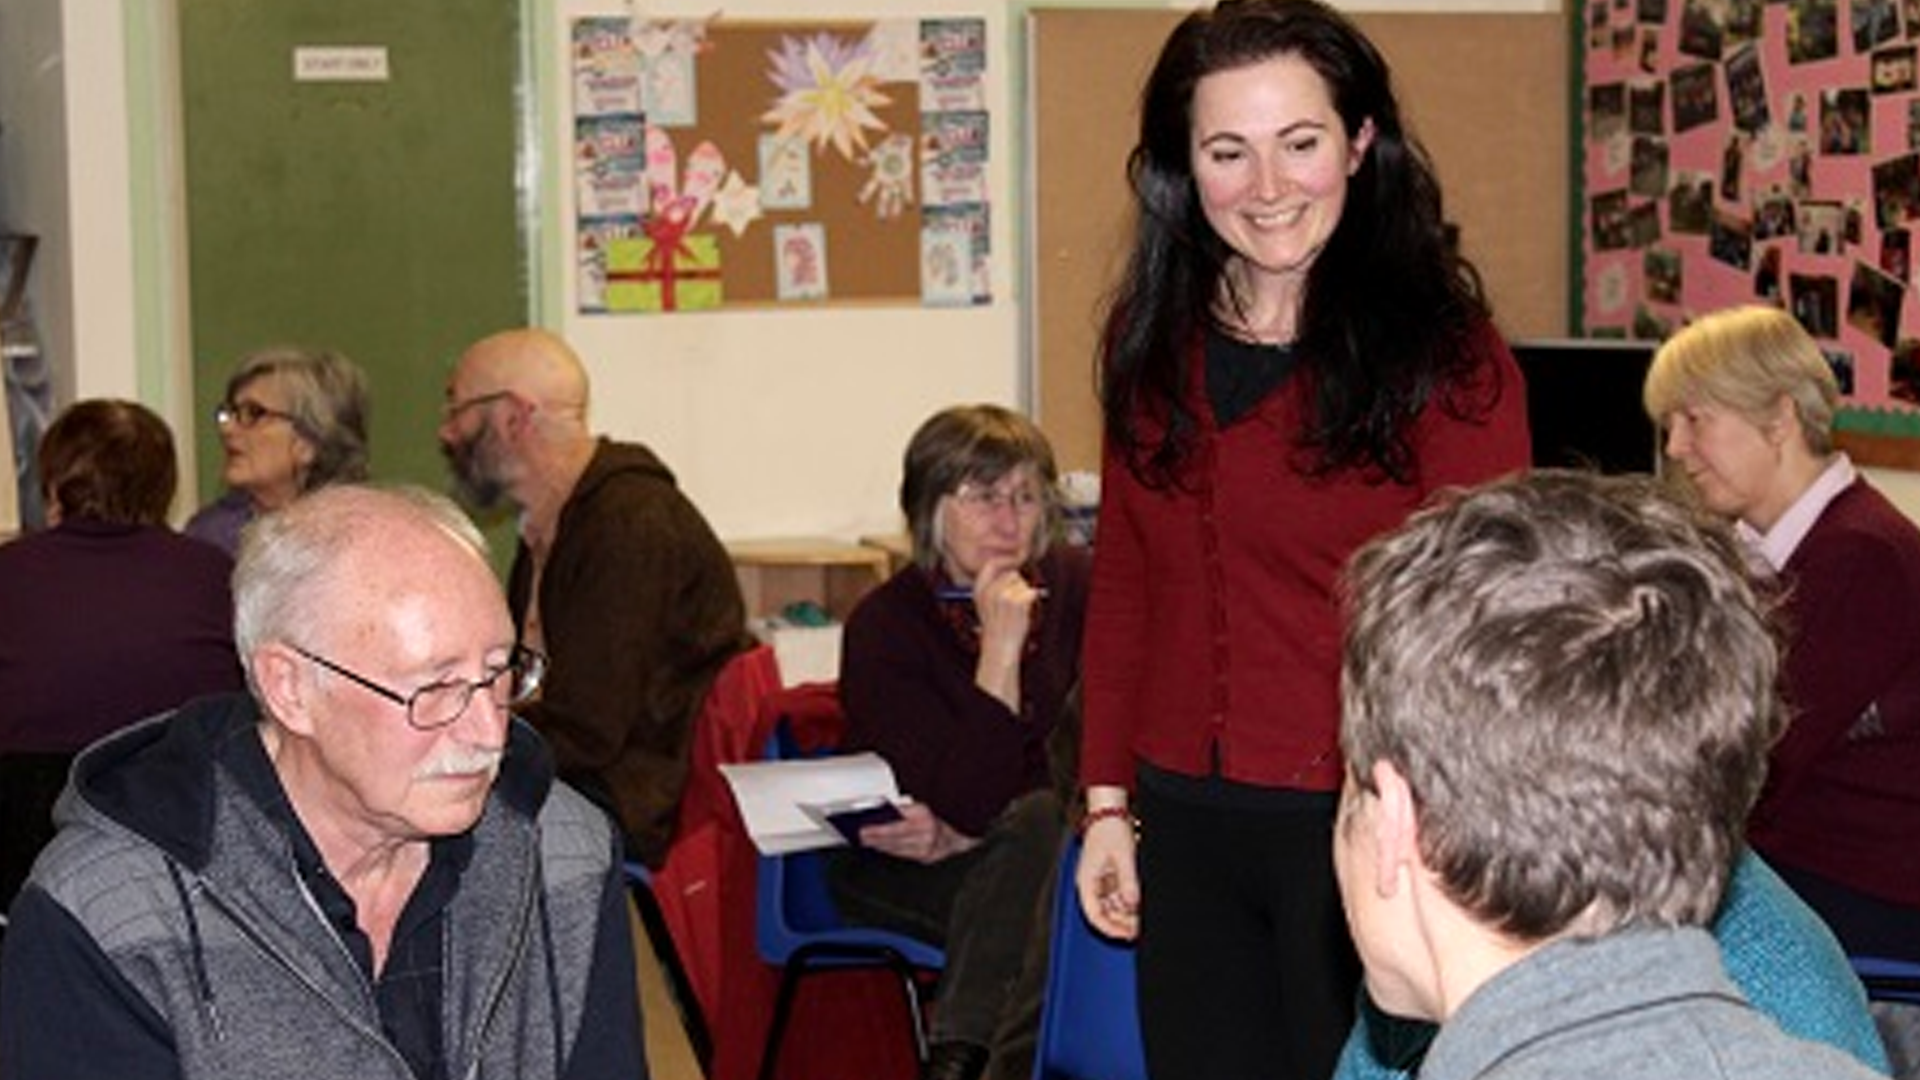 Whalley Range Labour - Community and Diversity Meeting in Whalley Range Angeliki Stogia